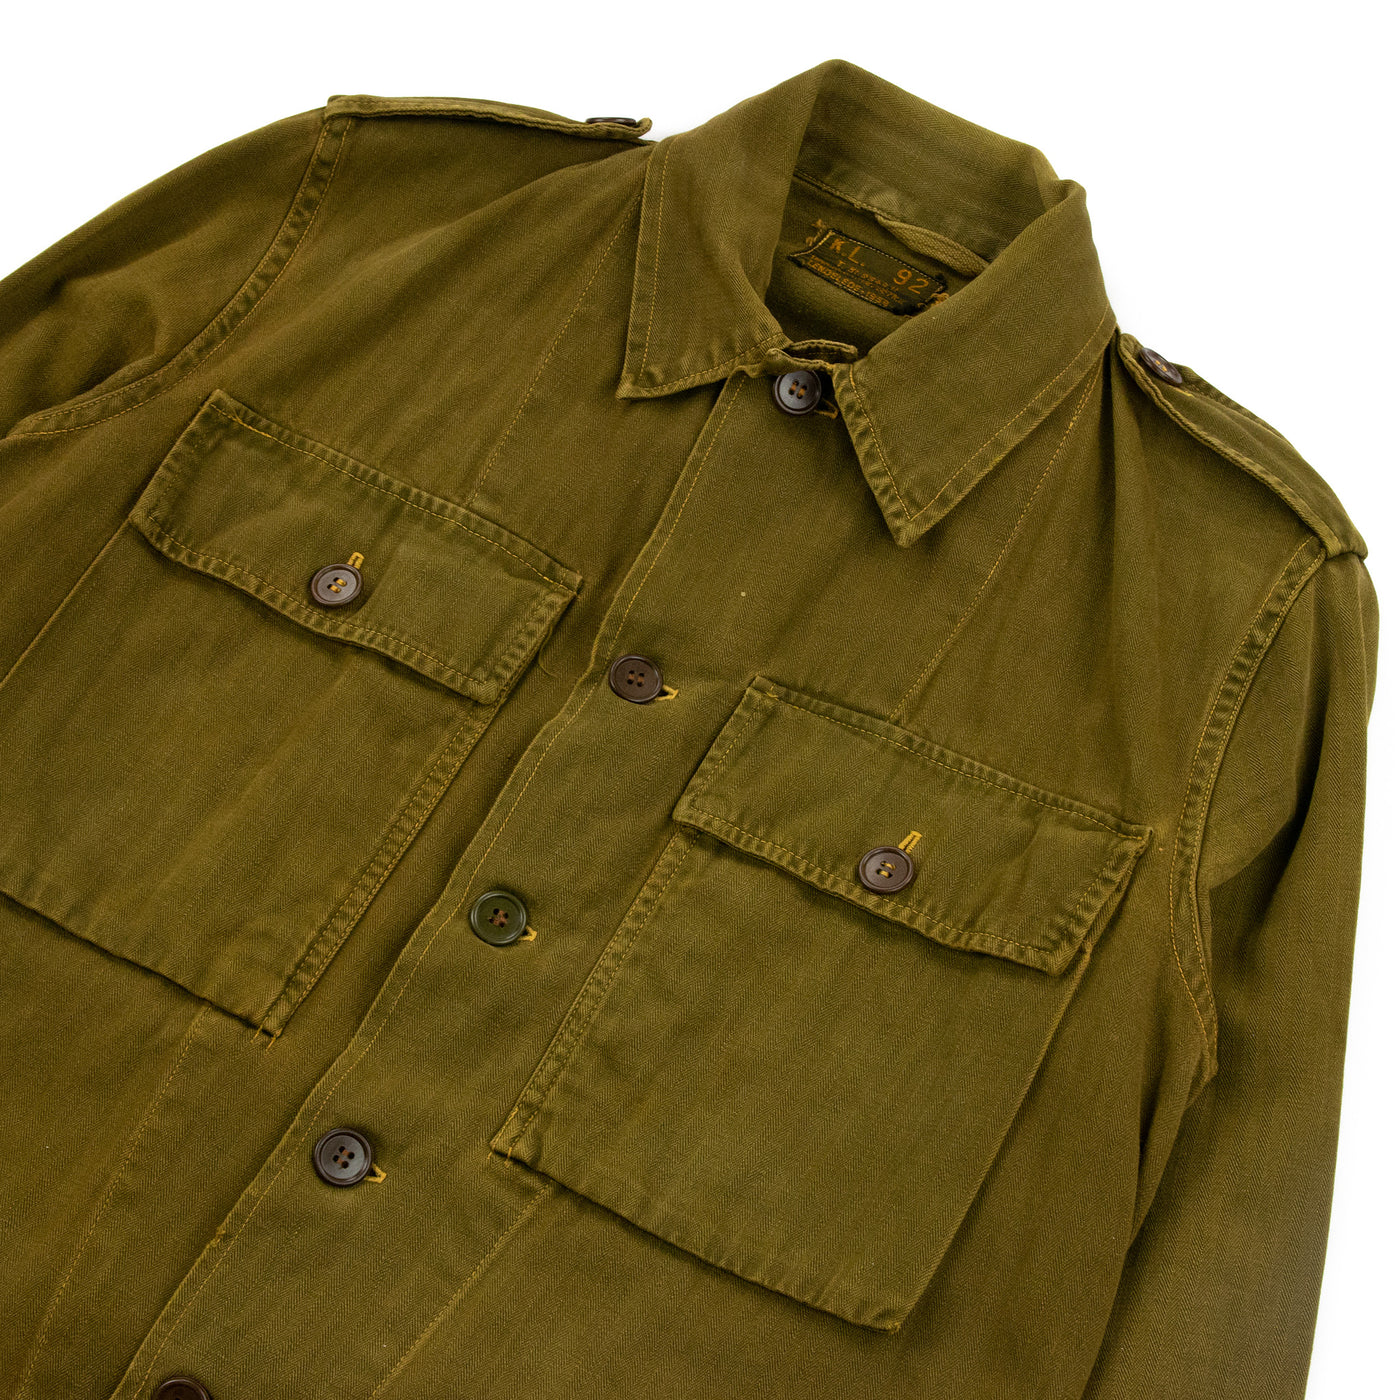 Vintage 1950s Dutch Army Military HBT Field Shirt Brown - S Front